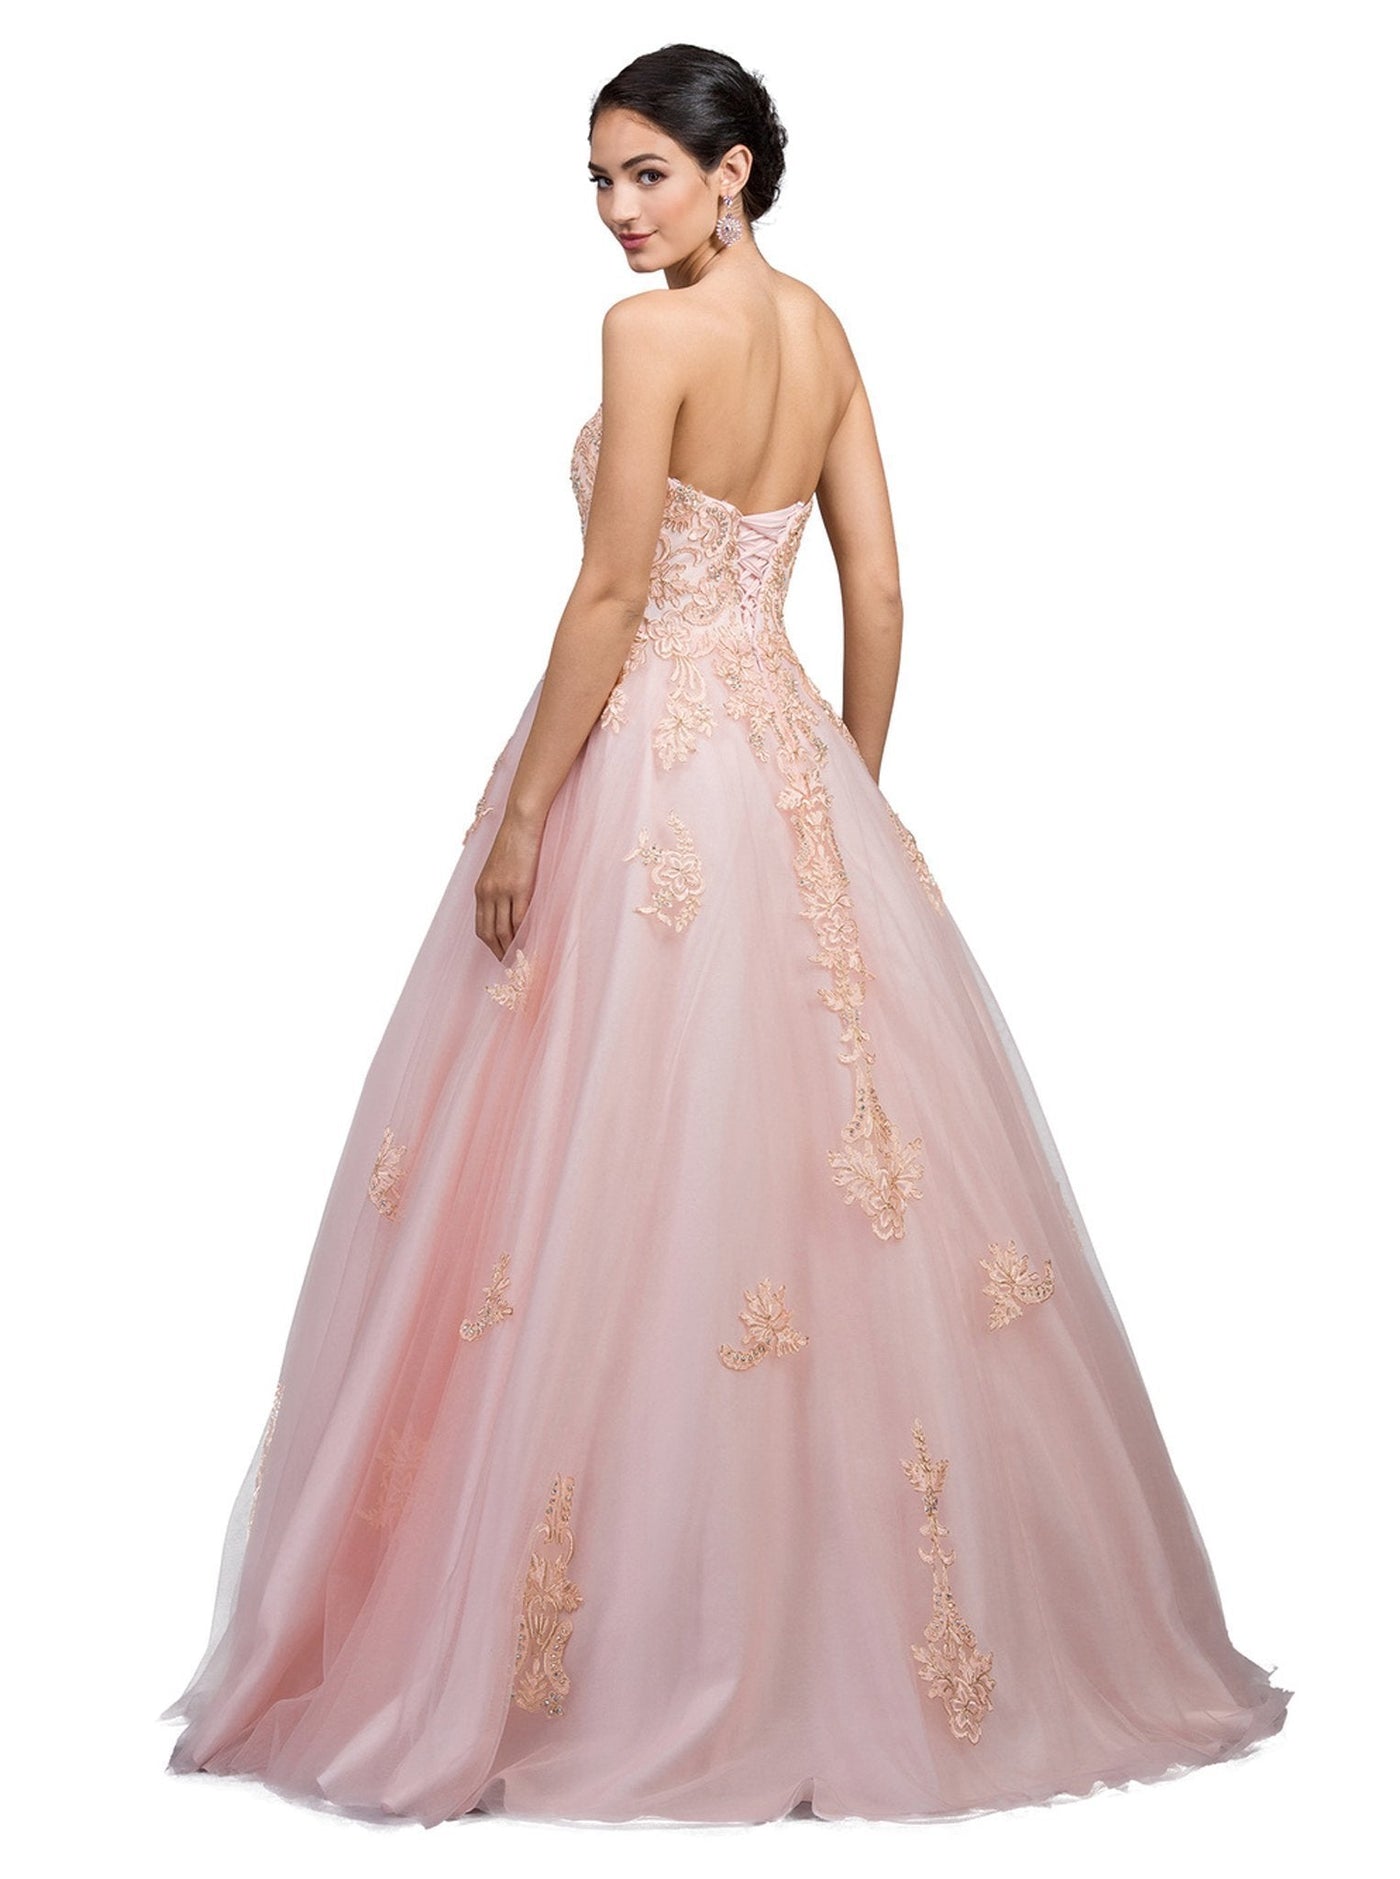 Dancing Queen - 1204 Strapless Embellished Sweetheart Prom Ballgown Special Occasion Dress M / Blush